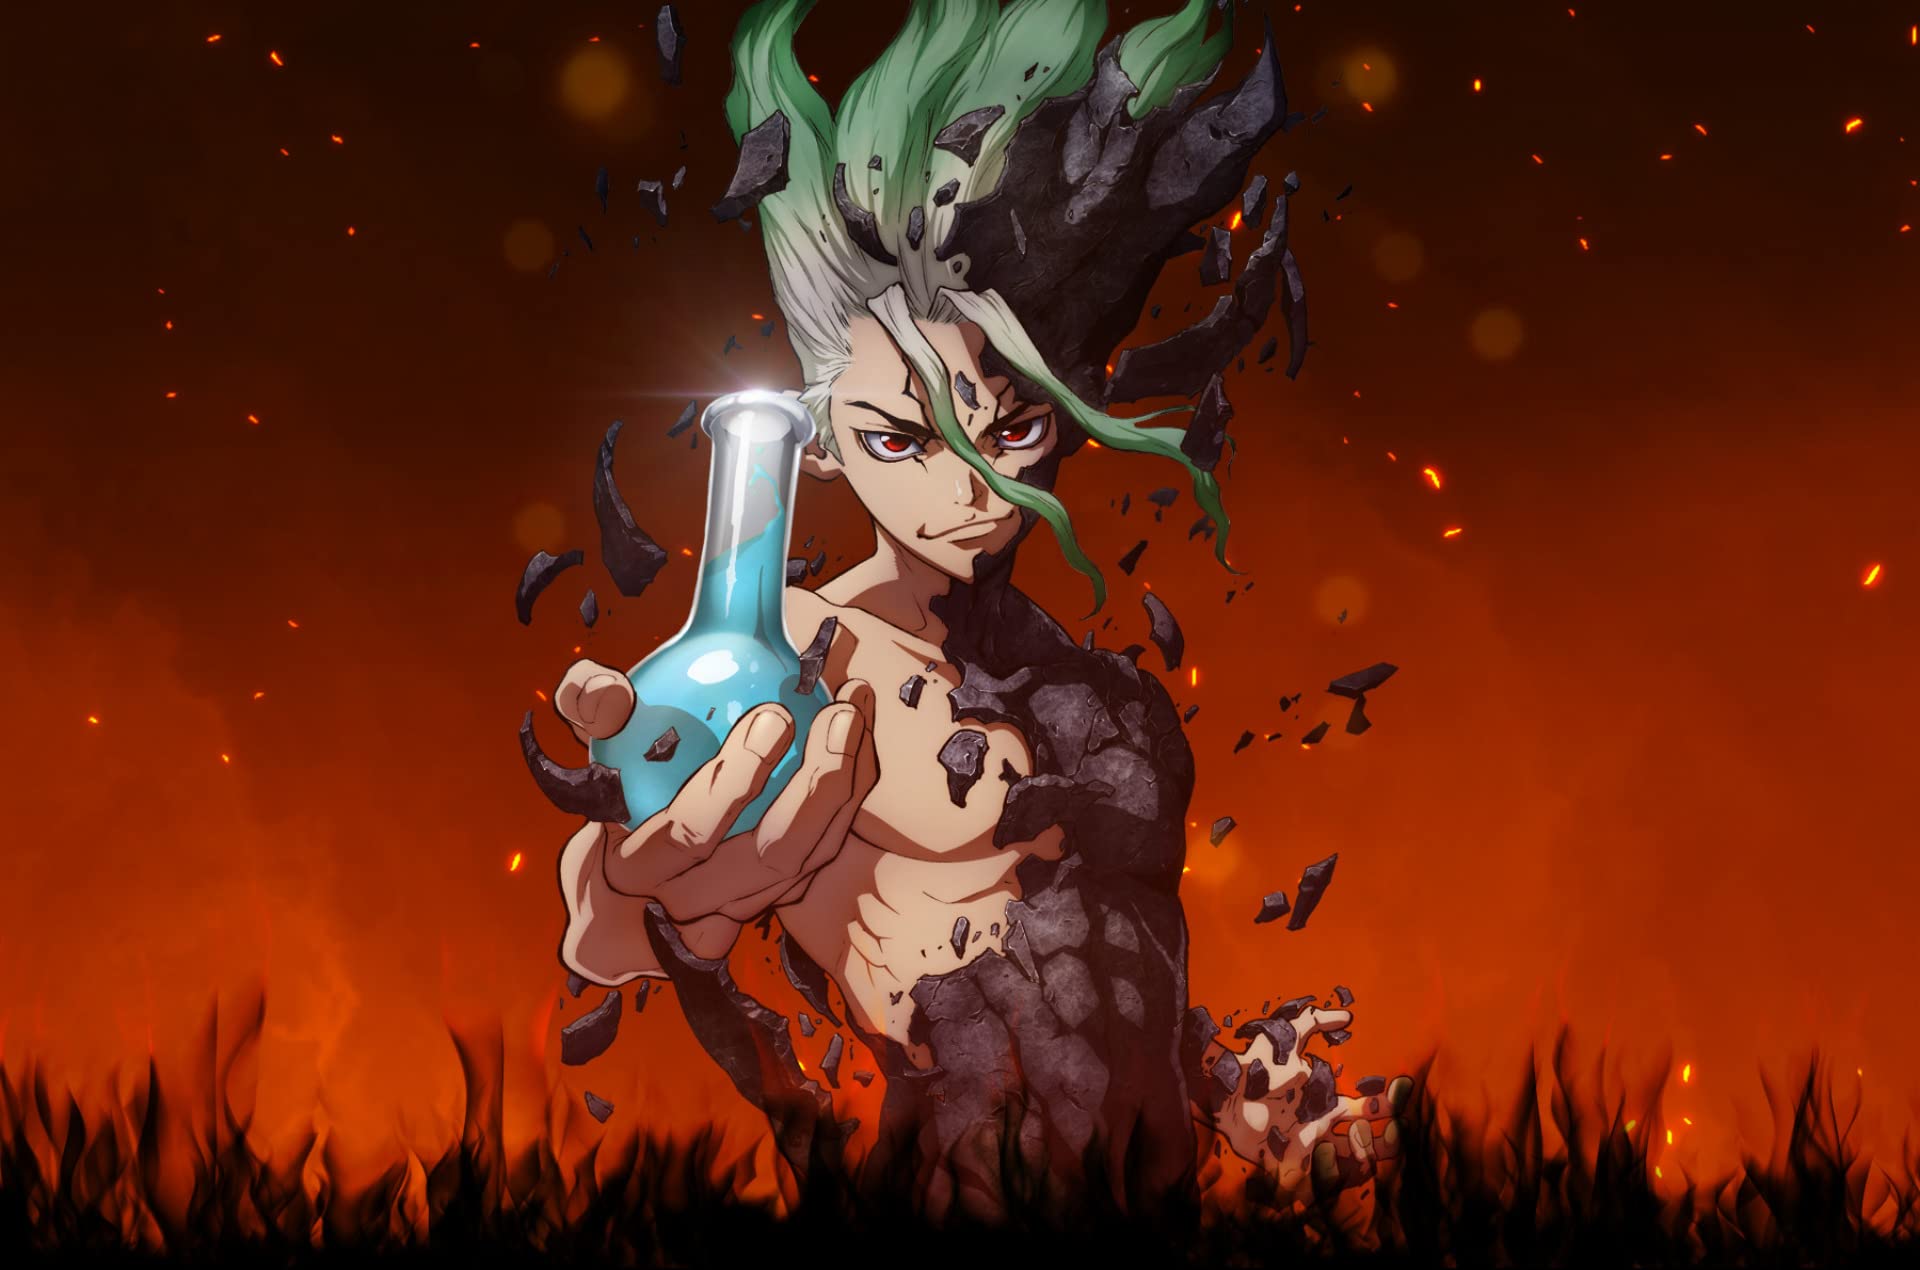 Dr. Stone: New World Episode 20 Reveals Preview Trailer - Anime Corner